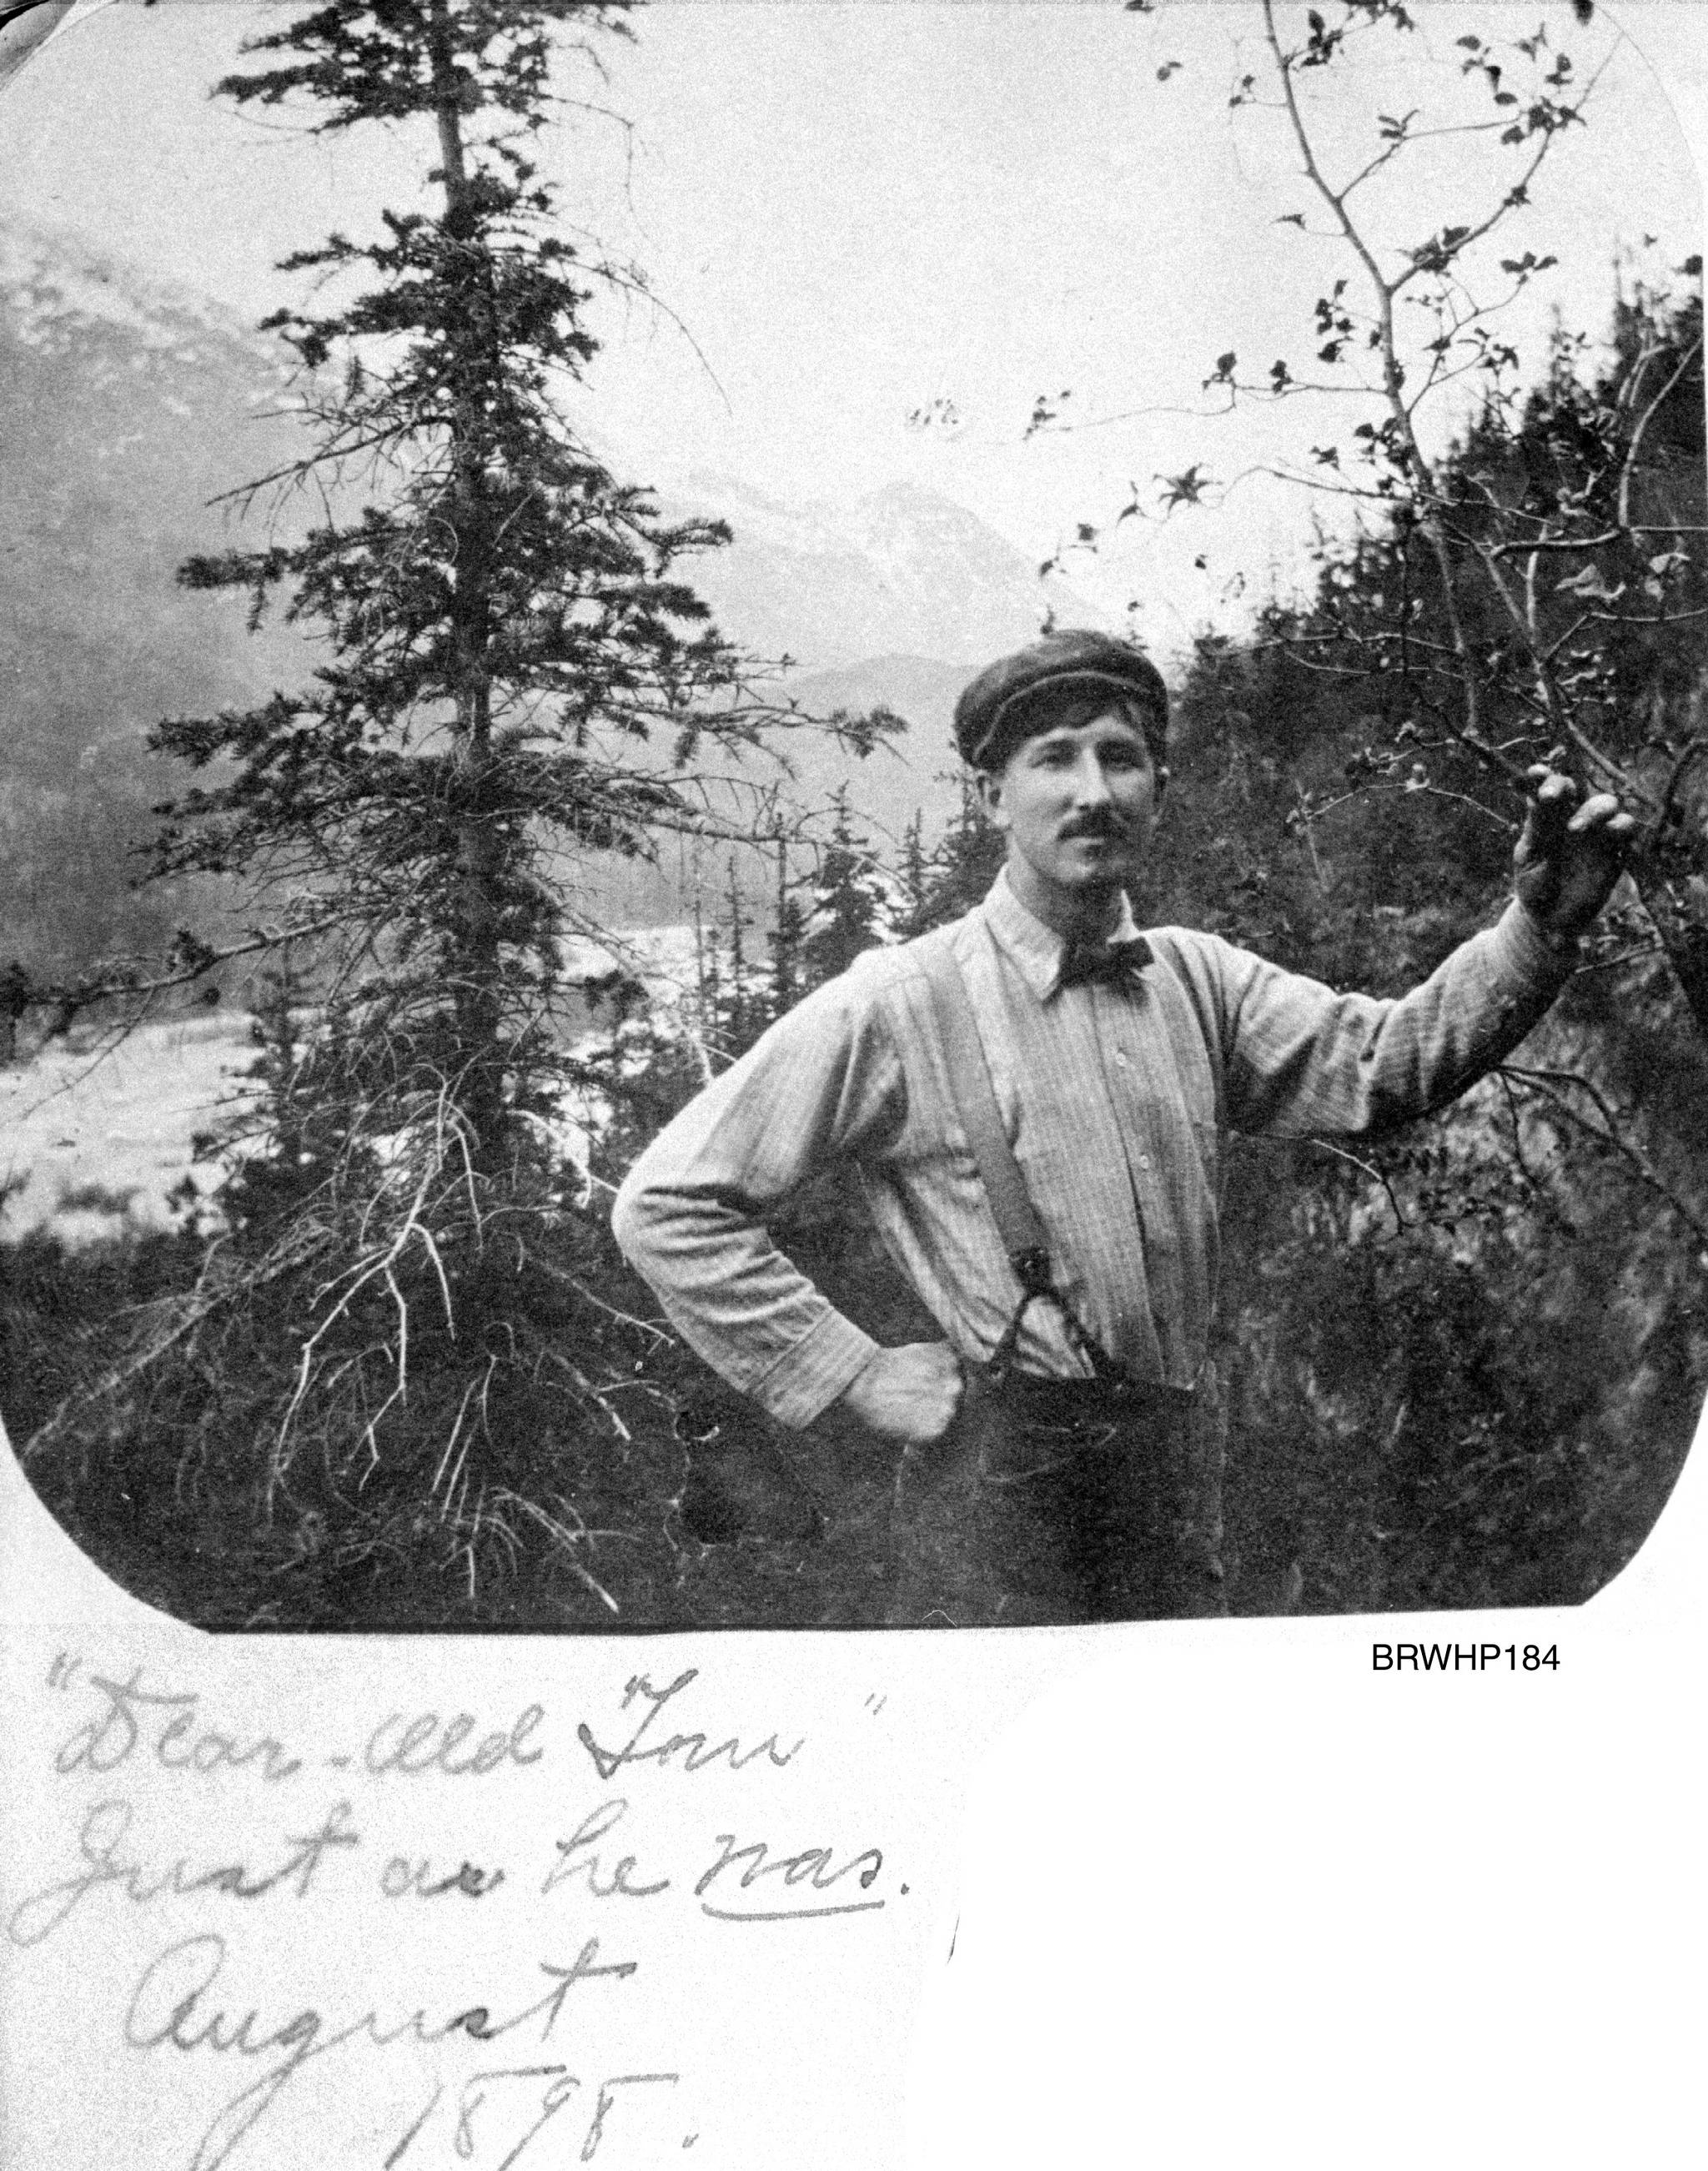 “Dear old Tom just as he was” looking southeast, circa August 1898. Tom Brackett standing on the west side of the Skagway River Valley with the valley floor below and the mountains surrounding Skagway behind him. Tom Brackett died of Typhoid fever on Feb. 26, 1901 in Portsmouth, New Hampshire. This note indicates that Mollie Brackett probably assembled her album sometime after Tom’s death. (Courtesy Photo | National Park Service, Klondike Gold Rush National Historical Park, Brackett Family Collection, BRWHP184, KLGO WP-23-5366.)